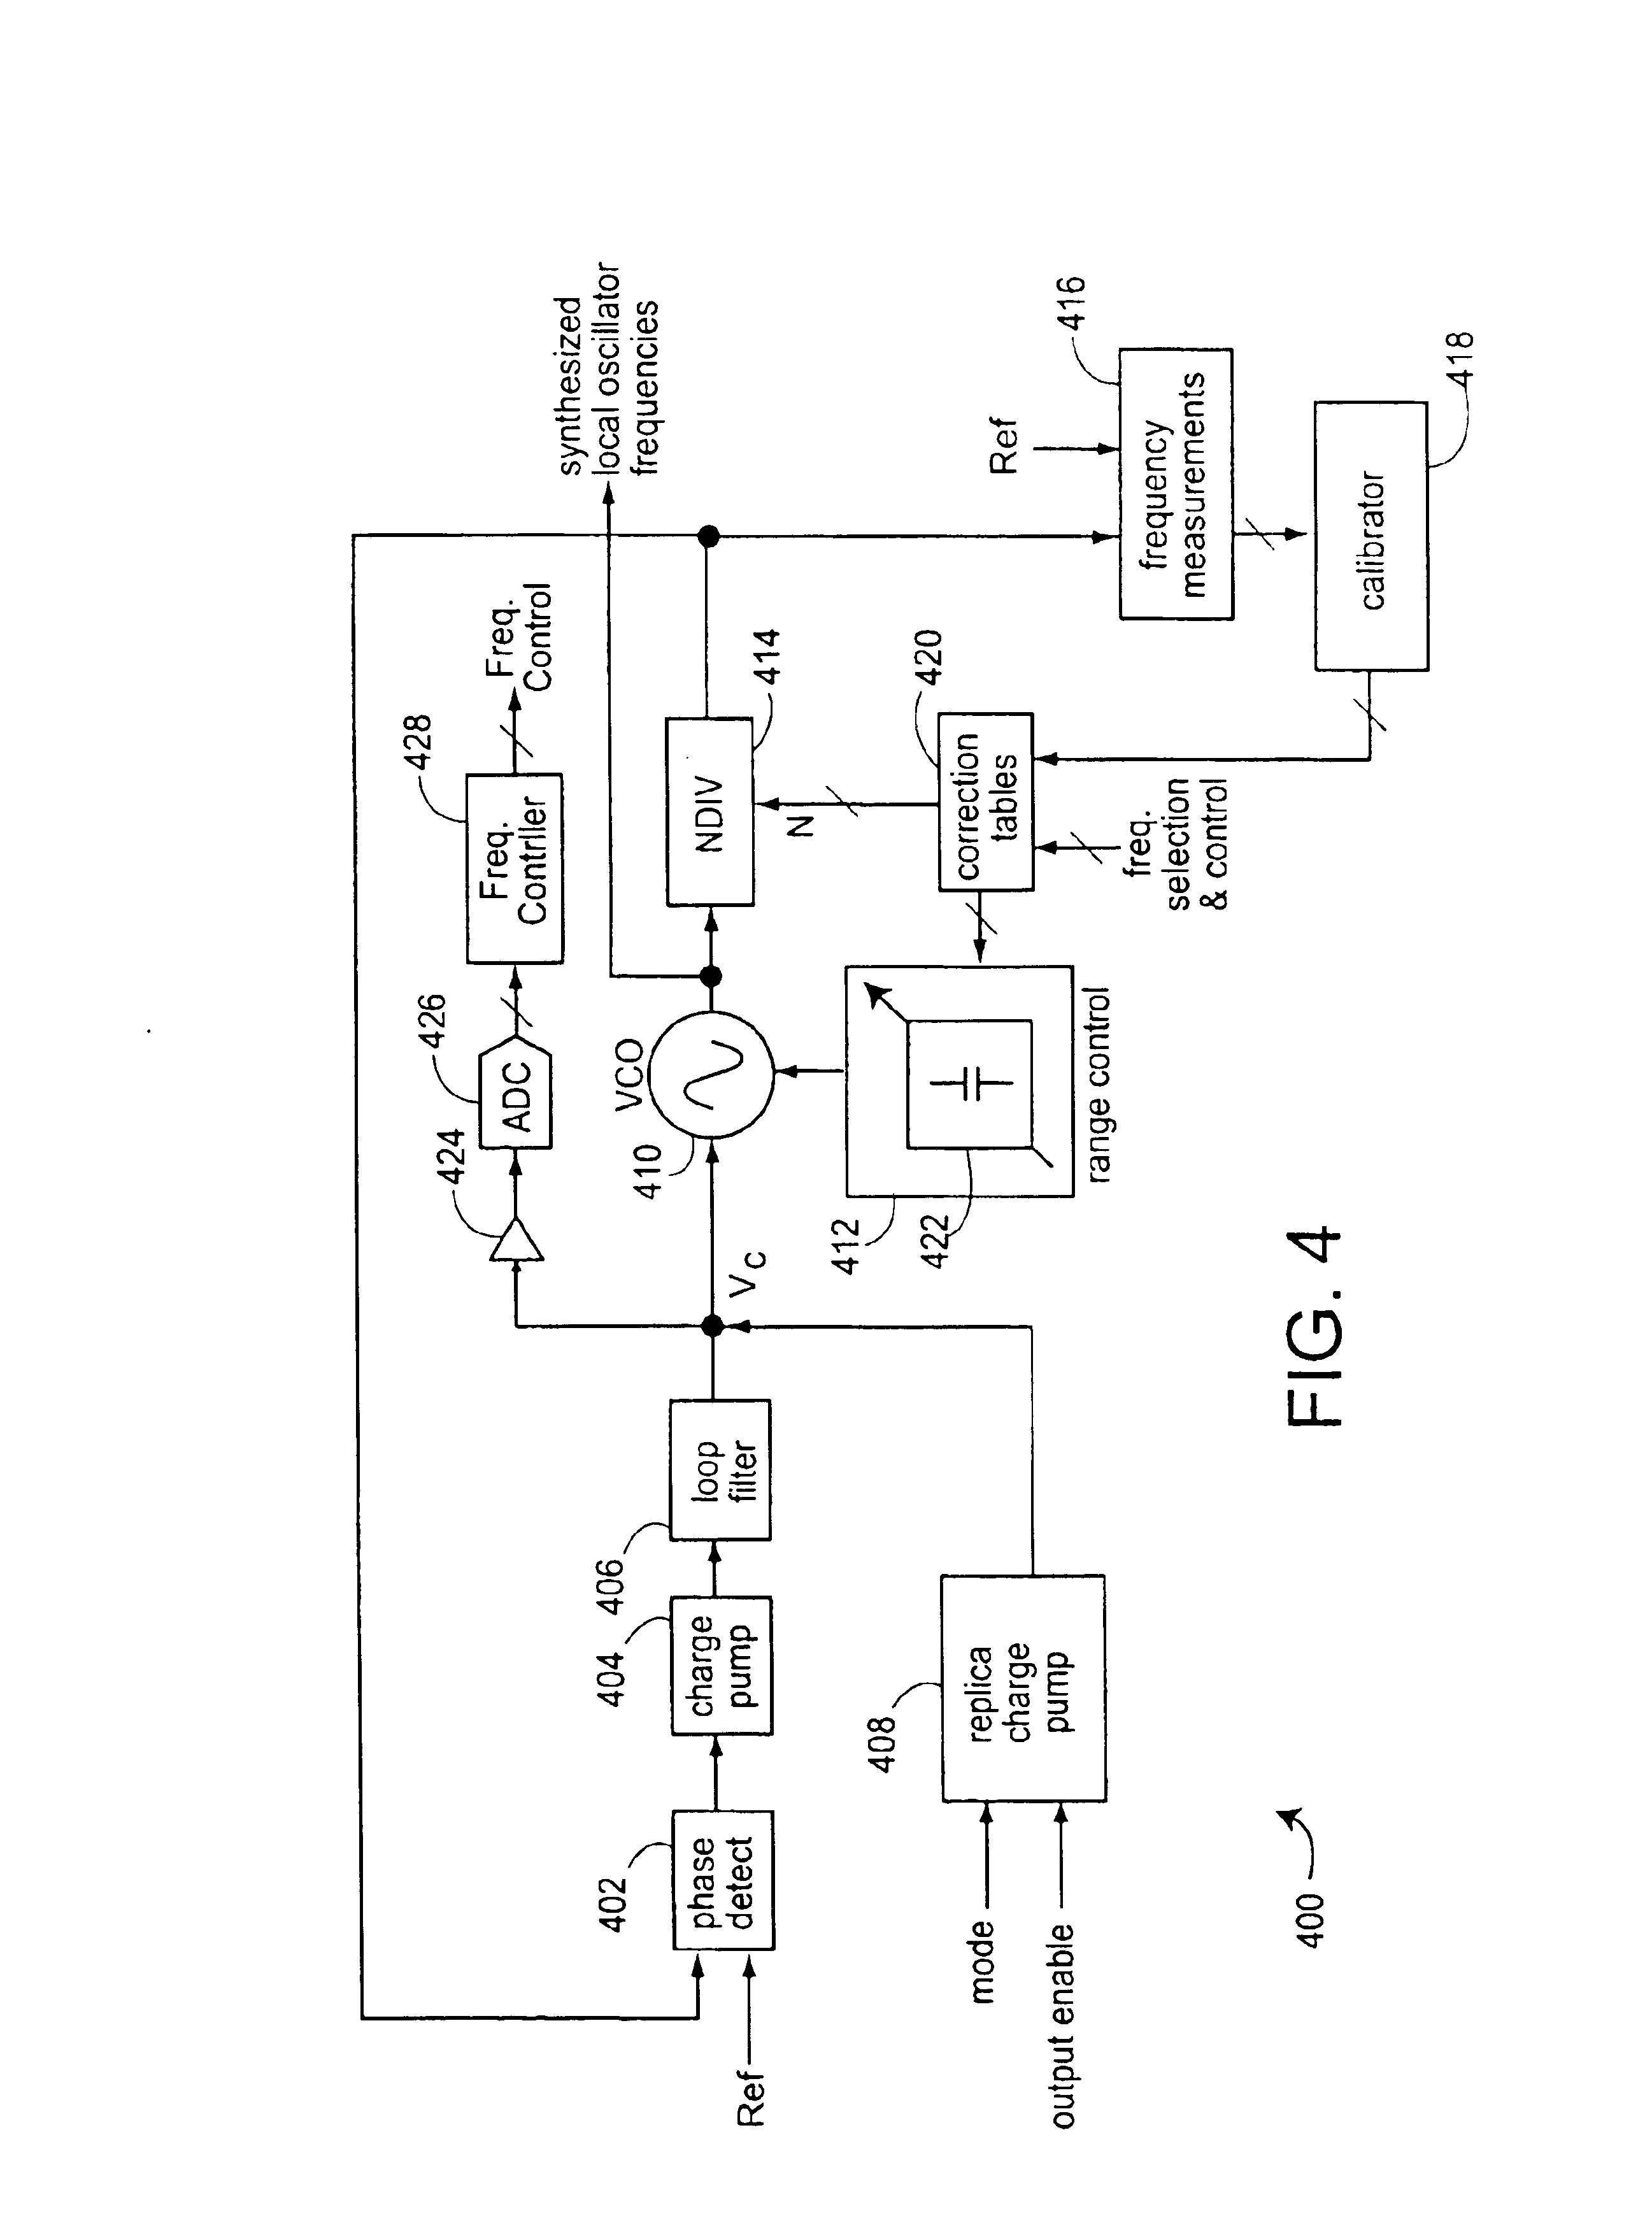 Frequency synthesizer using a VCO having a controllable operating point, and calibration and tuning thereof